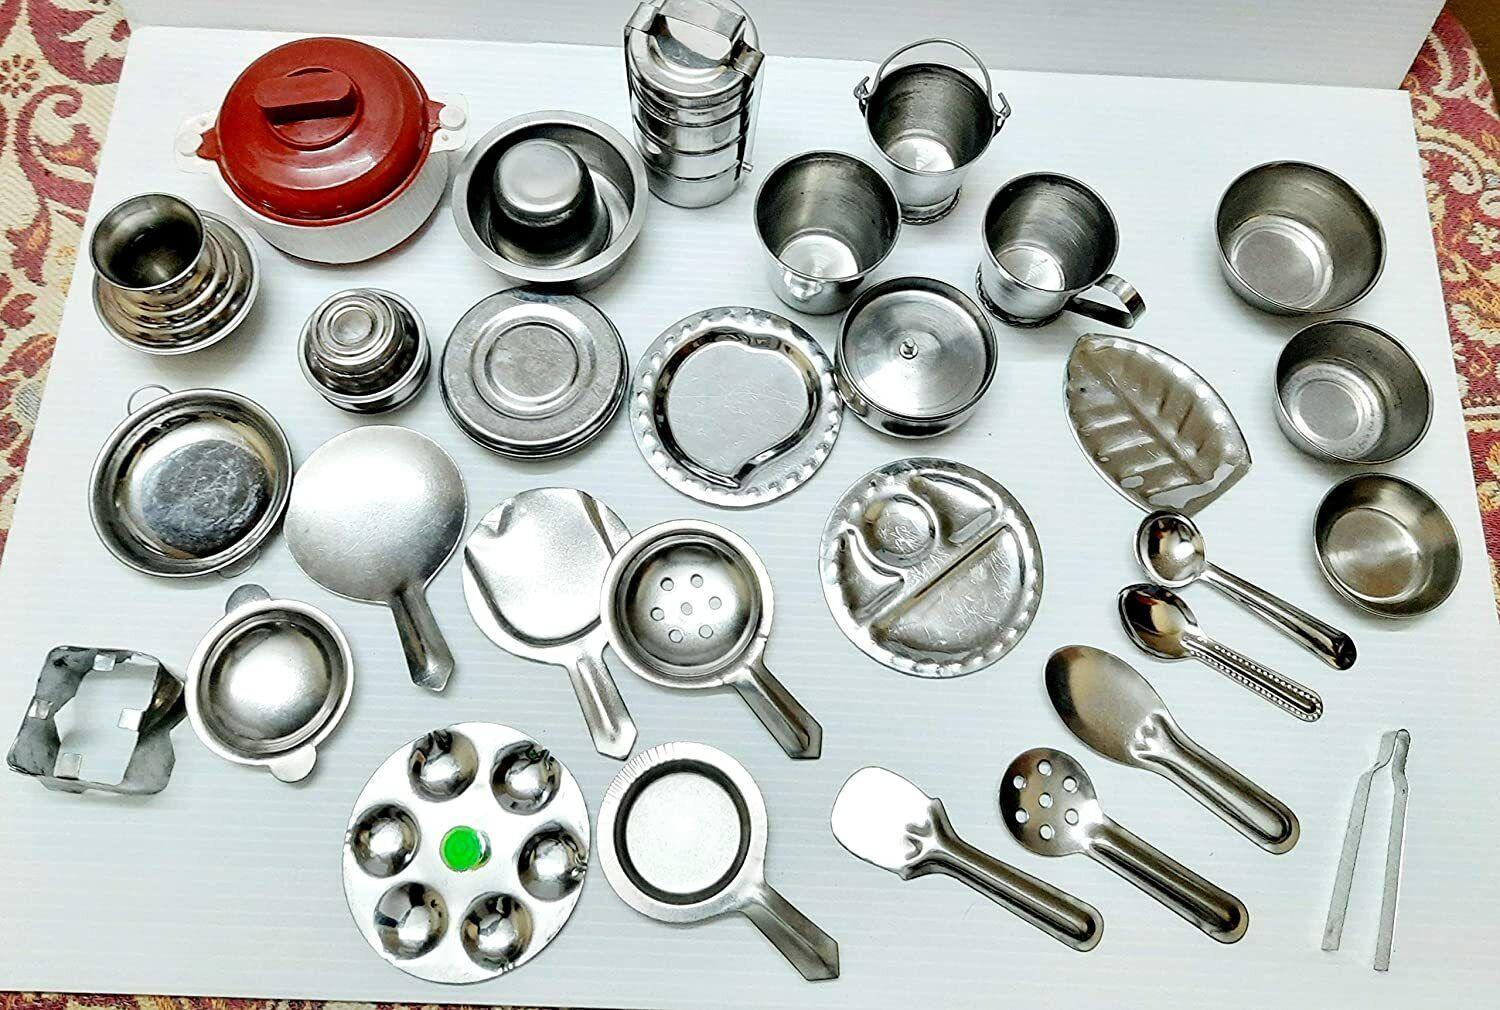 Stainless Steel Miniature Mini Kitchen Tableware Toy For Kids (Set Of 20 Pieces, Silver) - Walgrow.com